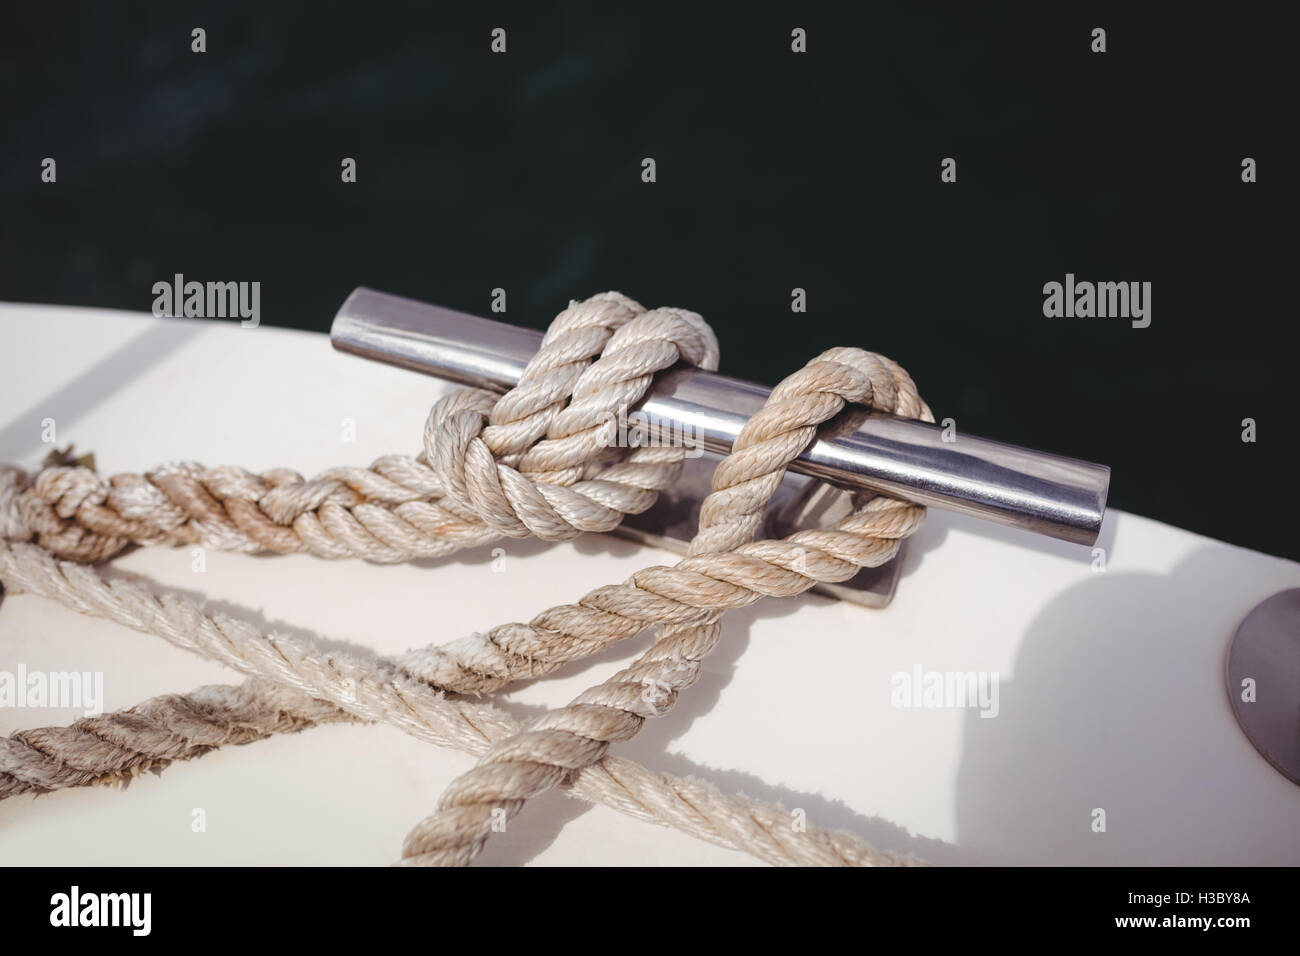 Rope tied to bollard on boat deck Stock Photo